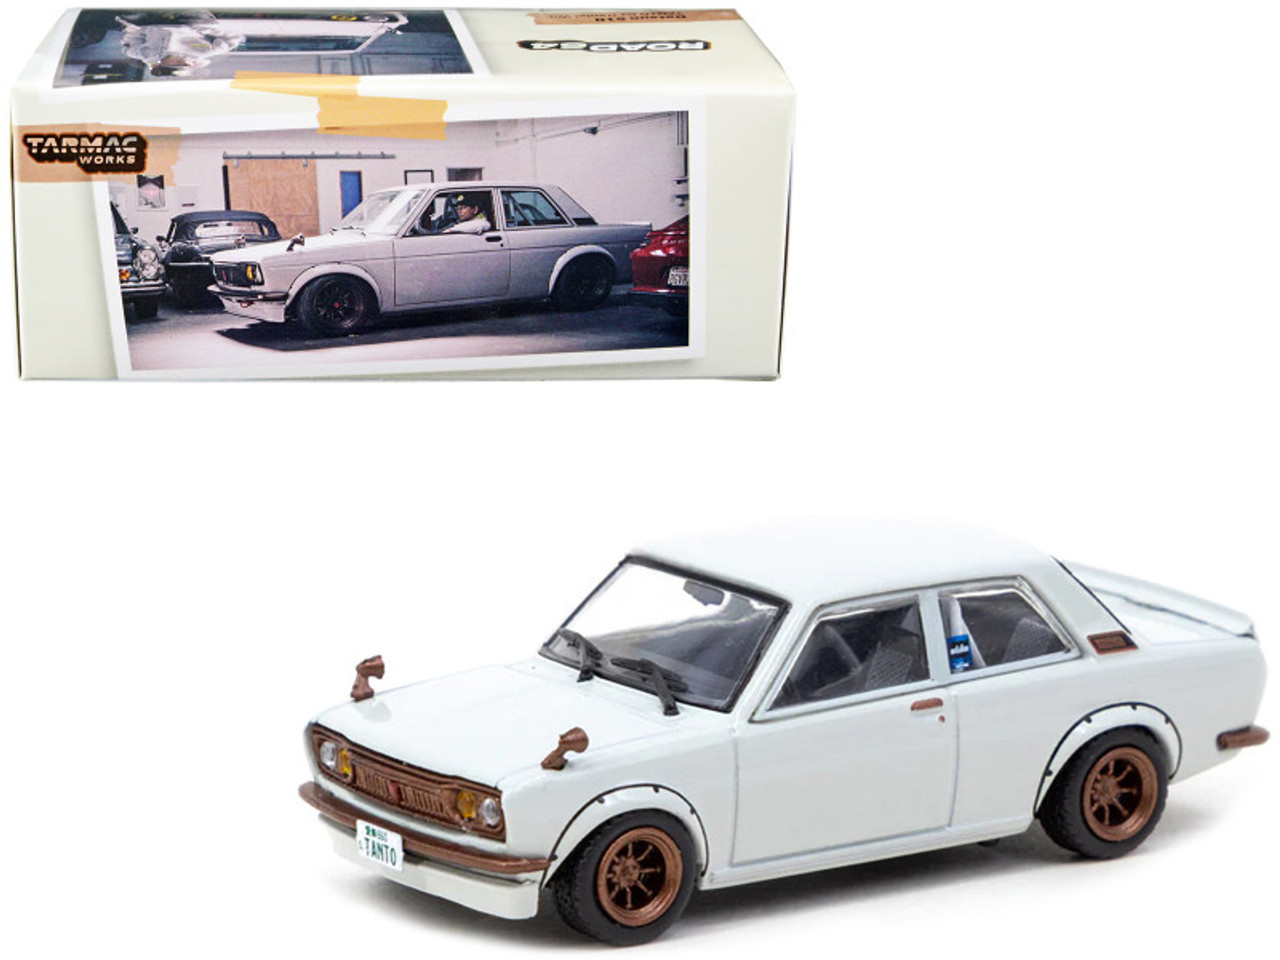 Datsun 510 White "Tanto by Daniel Wu" Limited Edition to 3552 pieces Worldwide "Road64" Series 1/64 Diecast Model Car by Tarmac Works